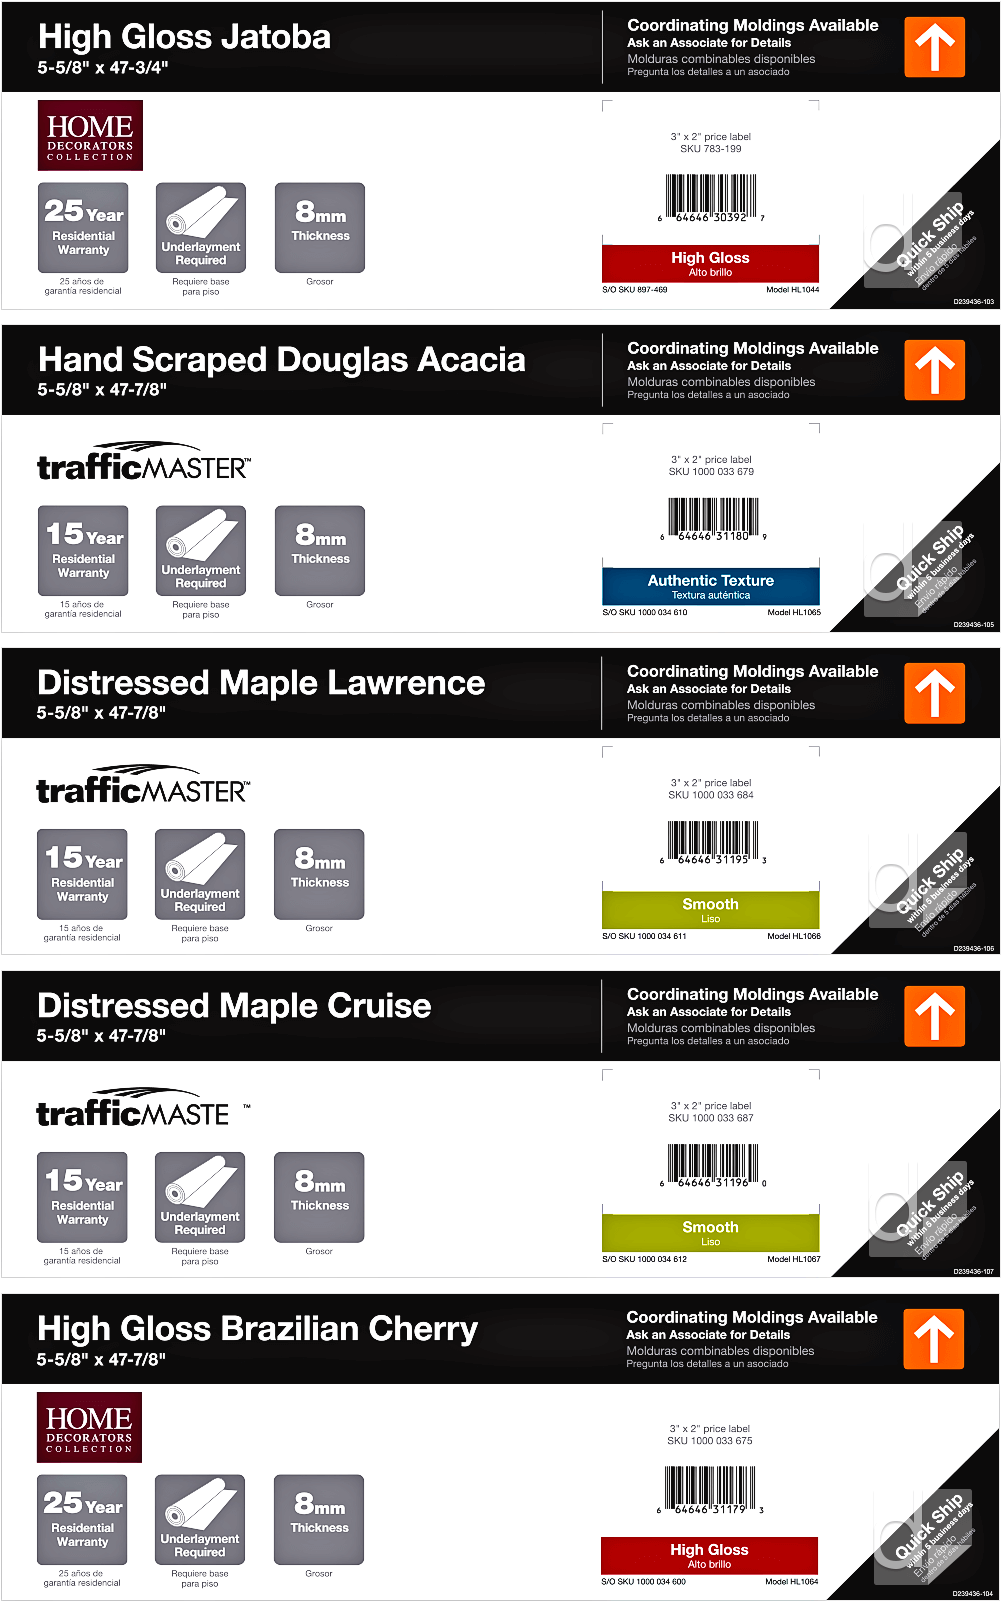 Shelf Tags or Product Display Cards Custom Printed by Dilco for TrafficMaster and Home Depot